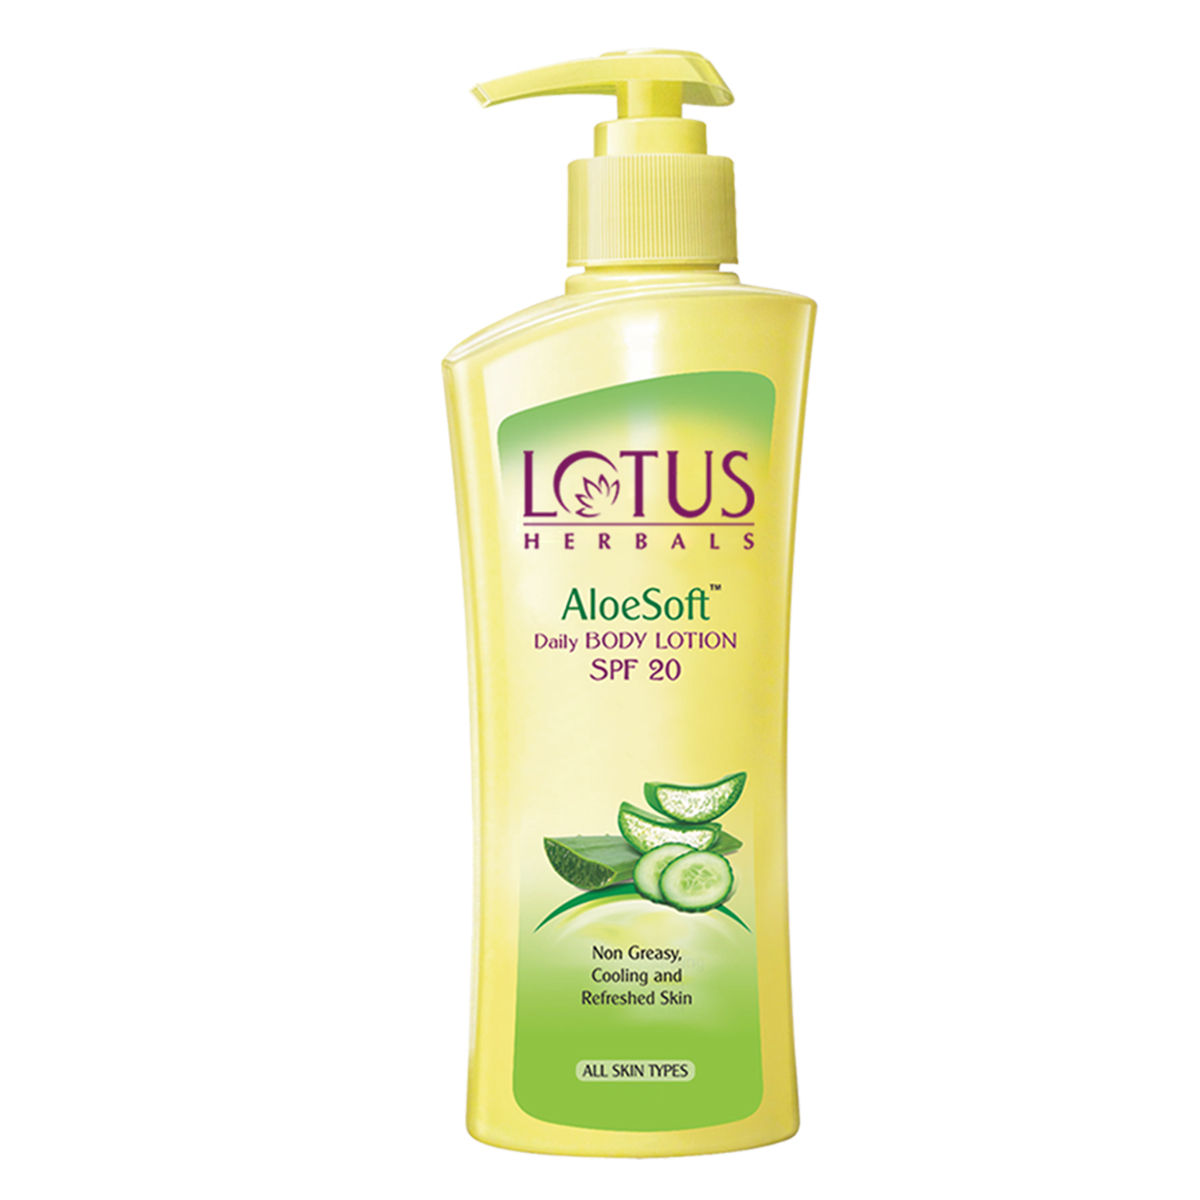 Buy Lotus Herbals Aloesoft Daily Body Lotion | Non Greasy | Cools and Refreshes Skin | SPF 20 | For All Skin Types | 250ml - Purplle